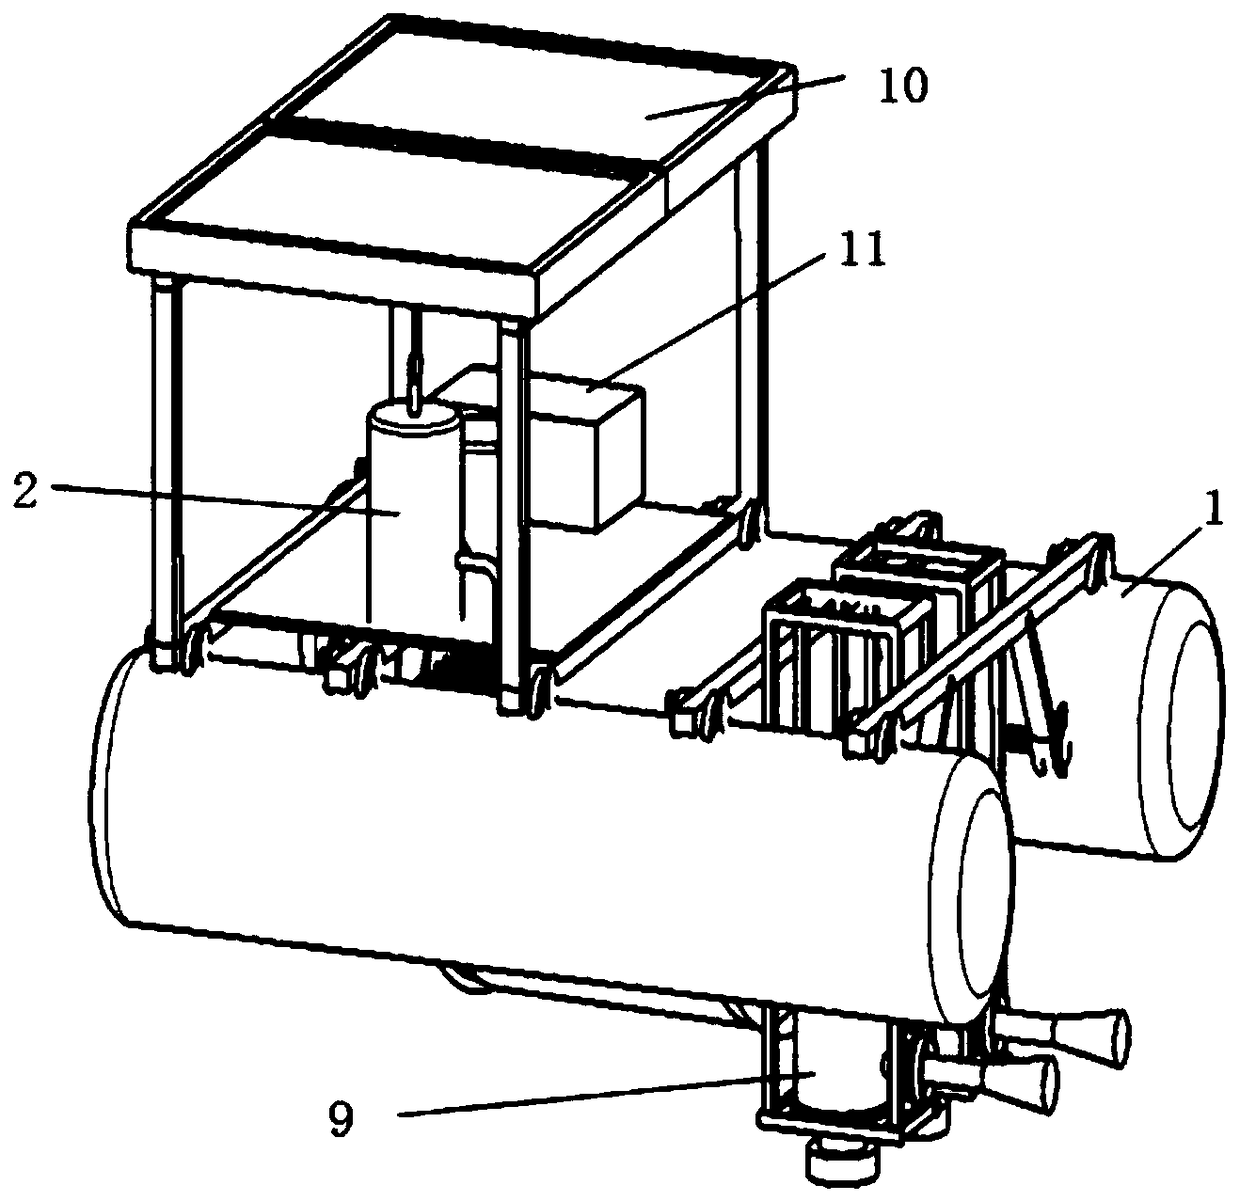 Self-moving aeration device for increasing content of dissolved oxygen in water